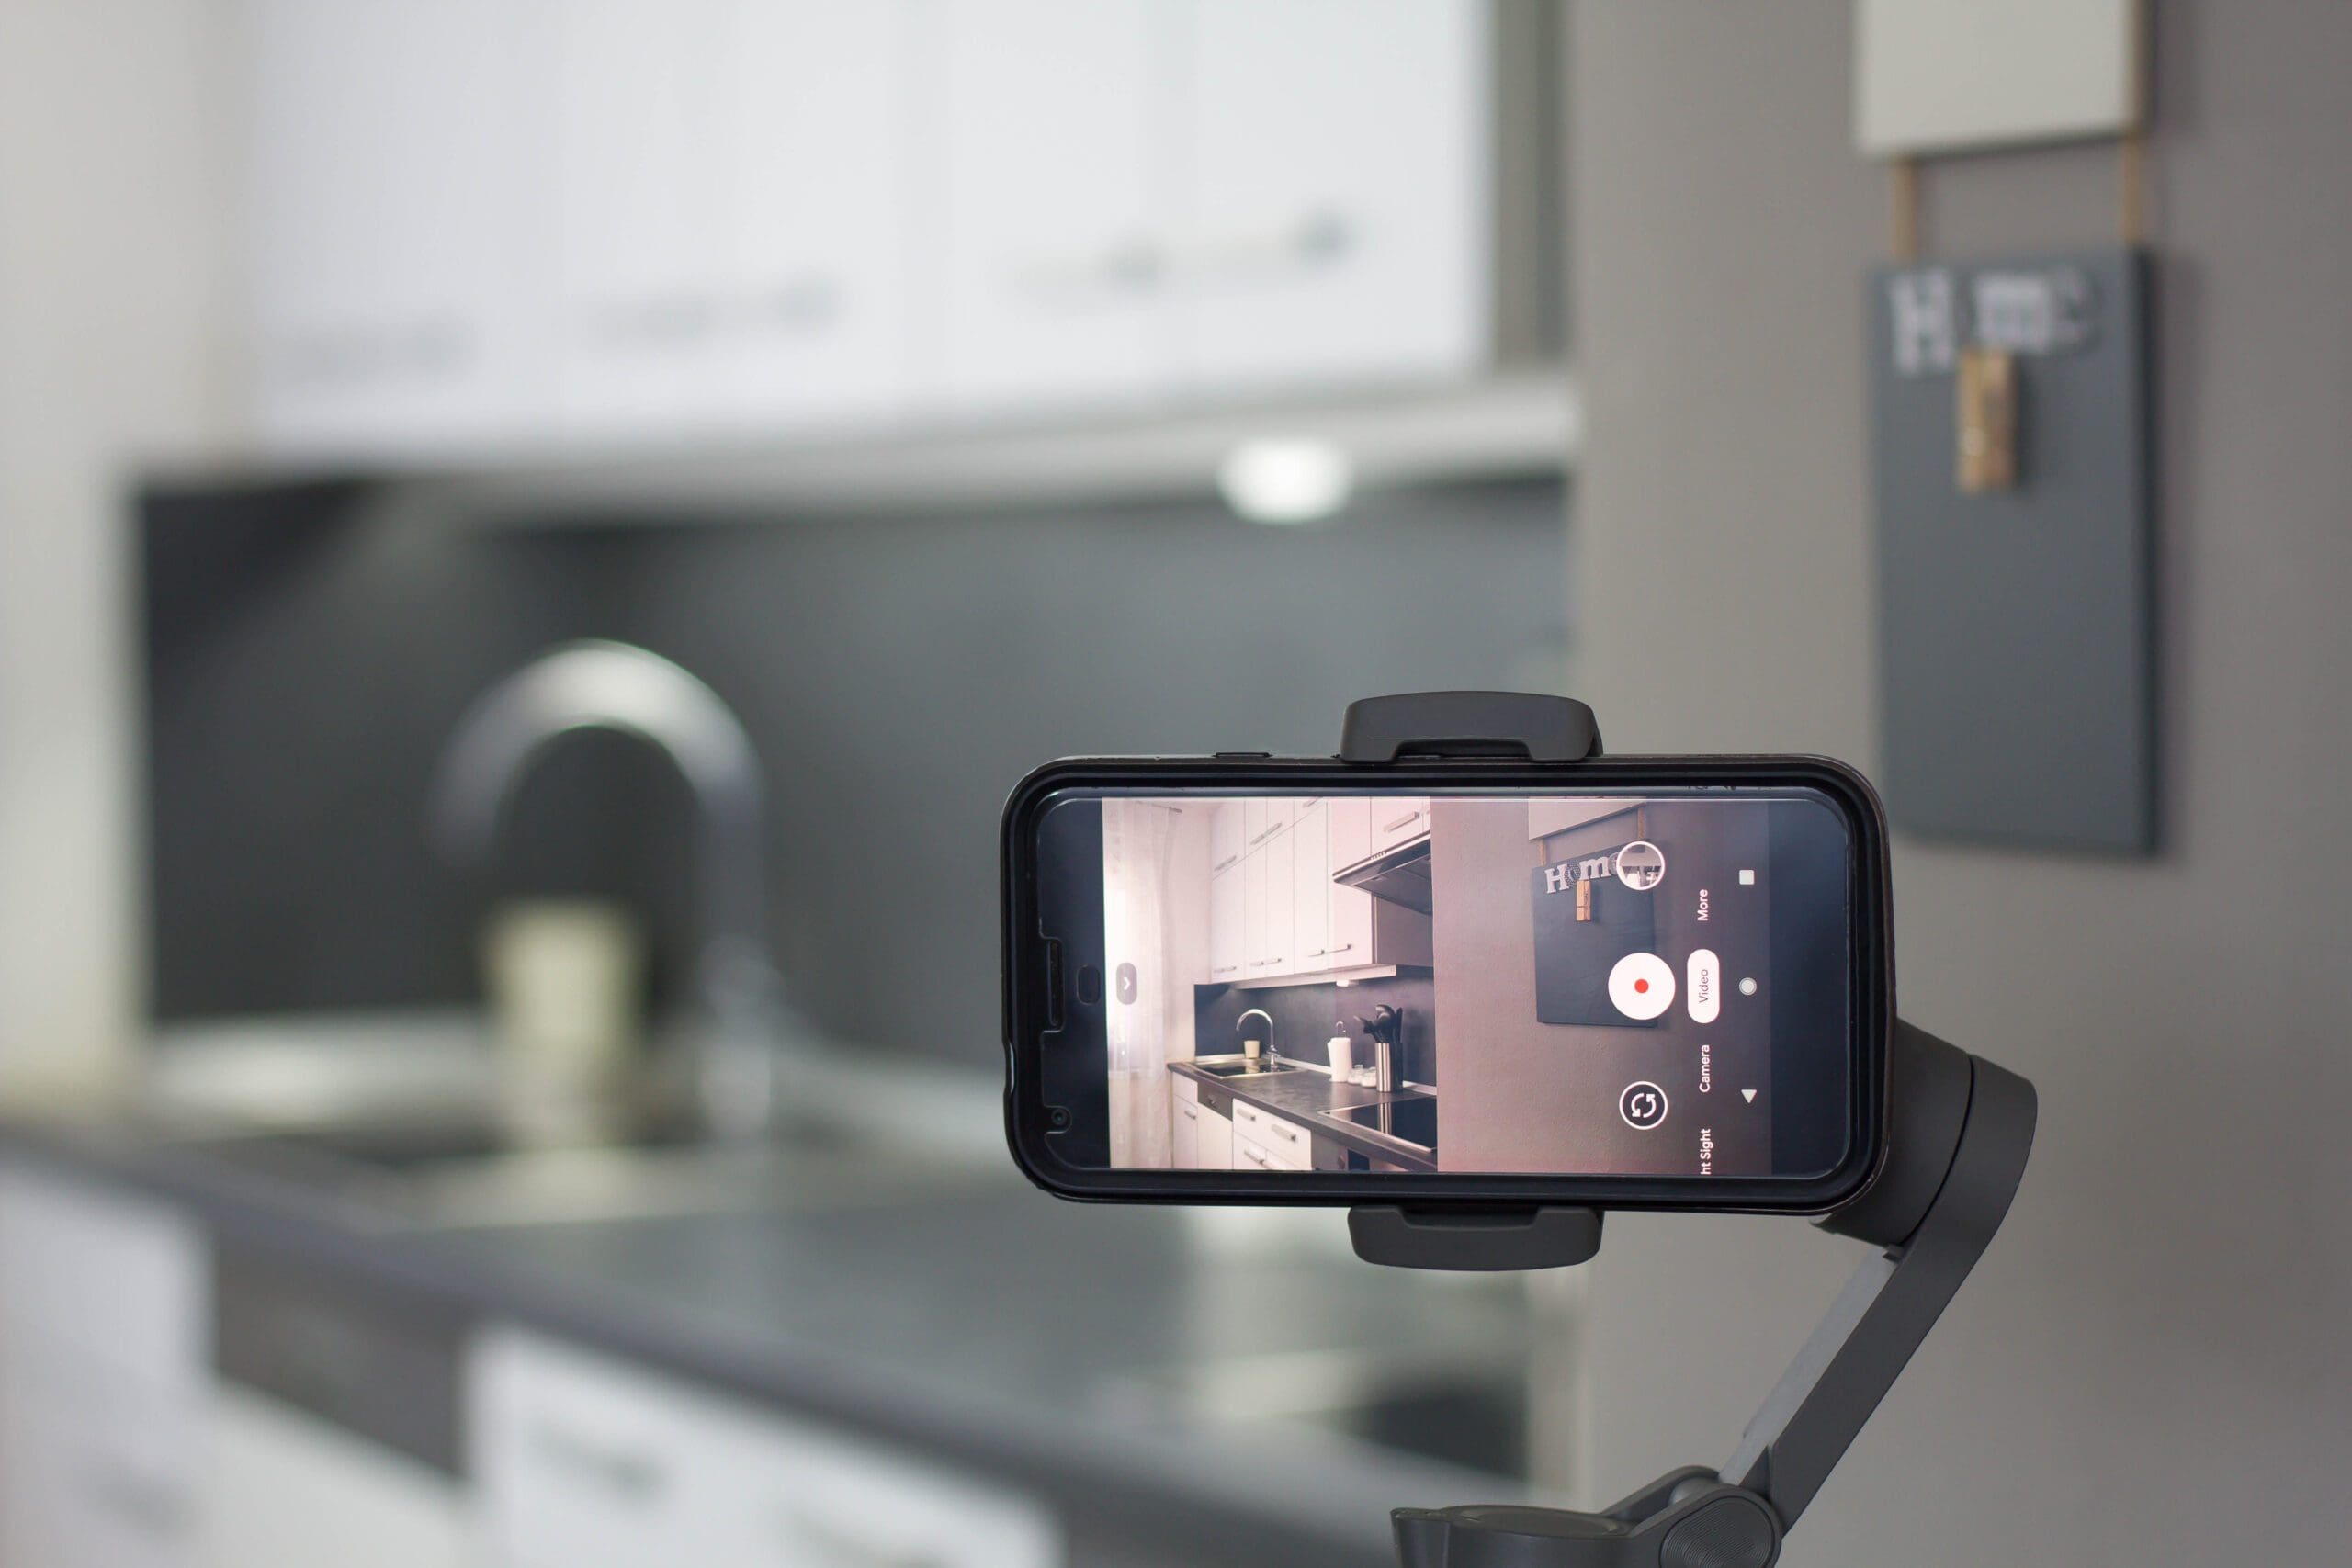 Mobile phone recording a home video on a gimbal stabilizer.